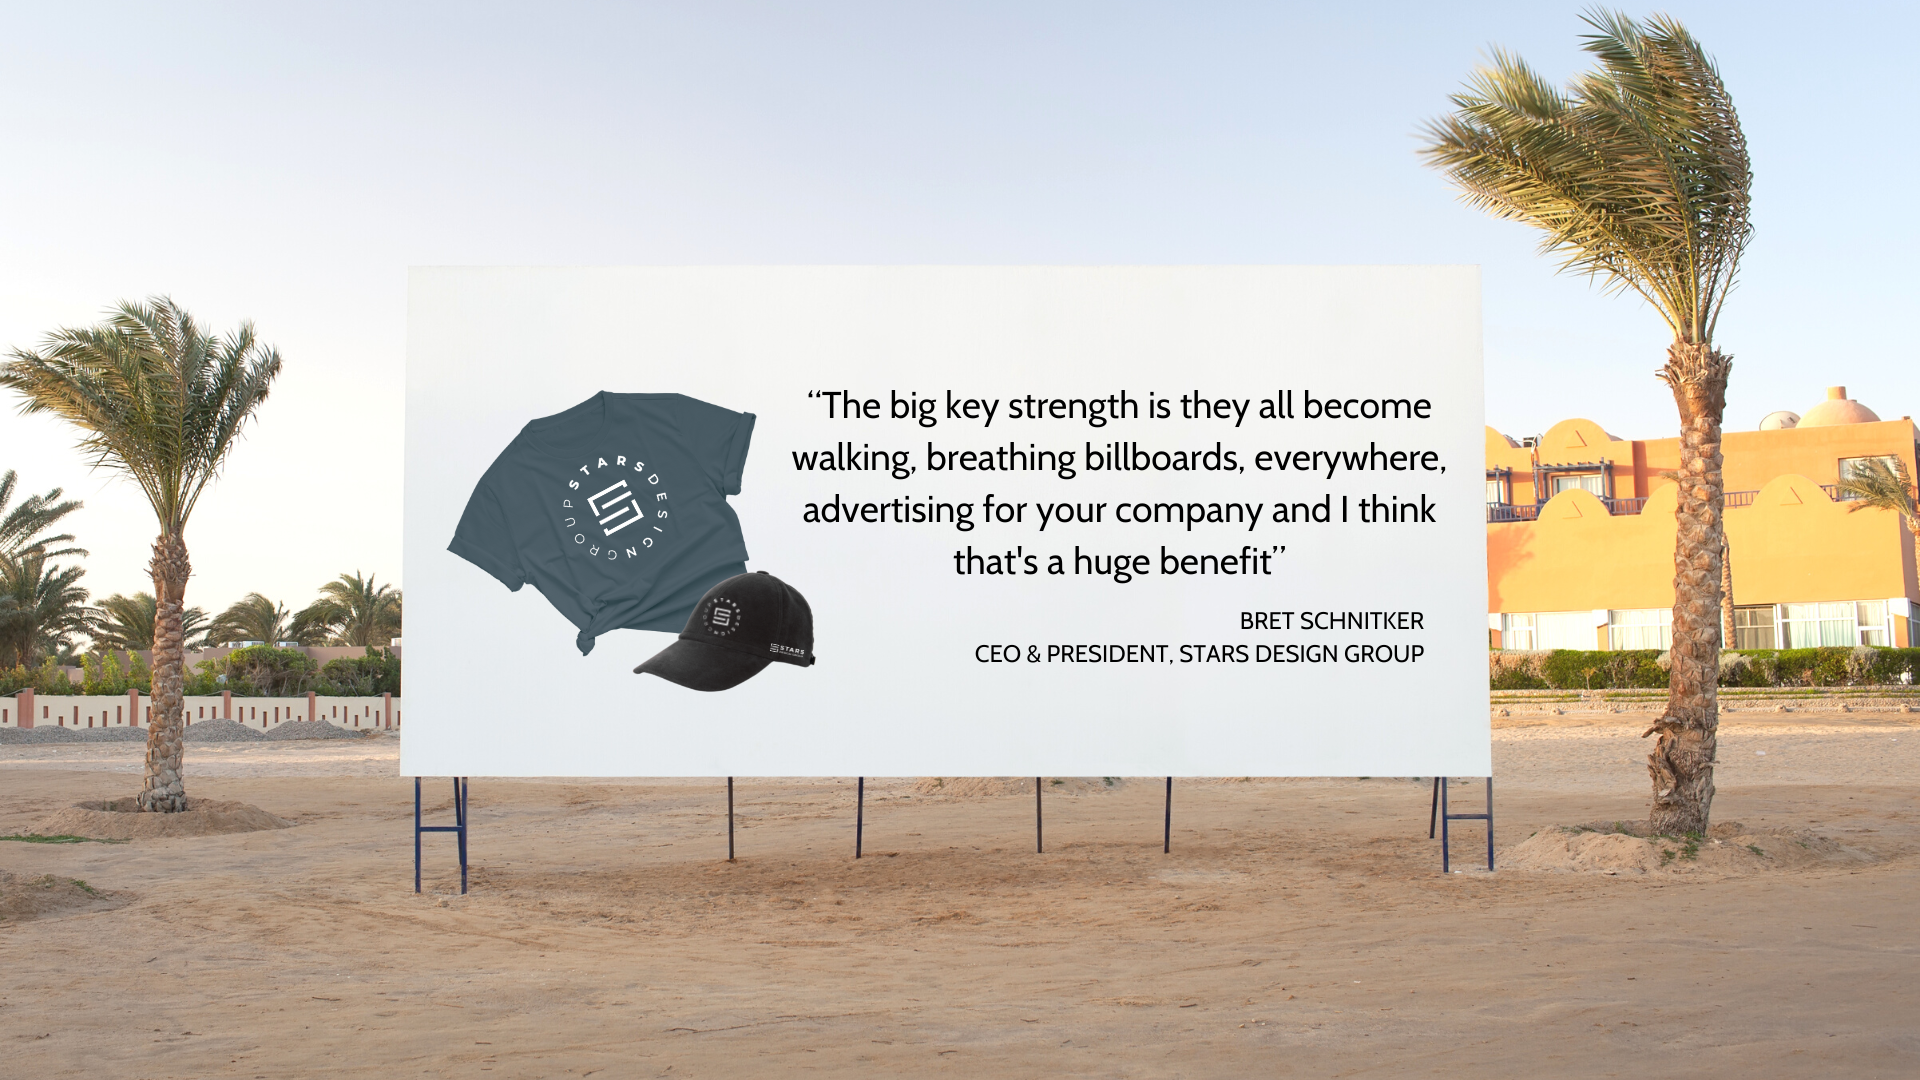 Billboard with the Quote " The big key strength is they all become walking, breathing billboards, everywhere, advertising for your company and I think that's a huge benefit" - Bret Schnitker CEO & President, Stars Design Group